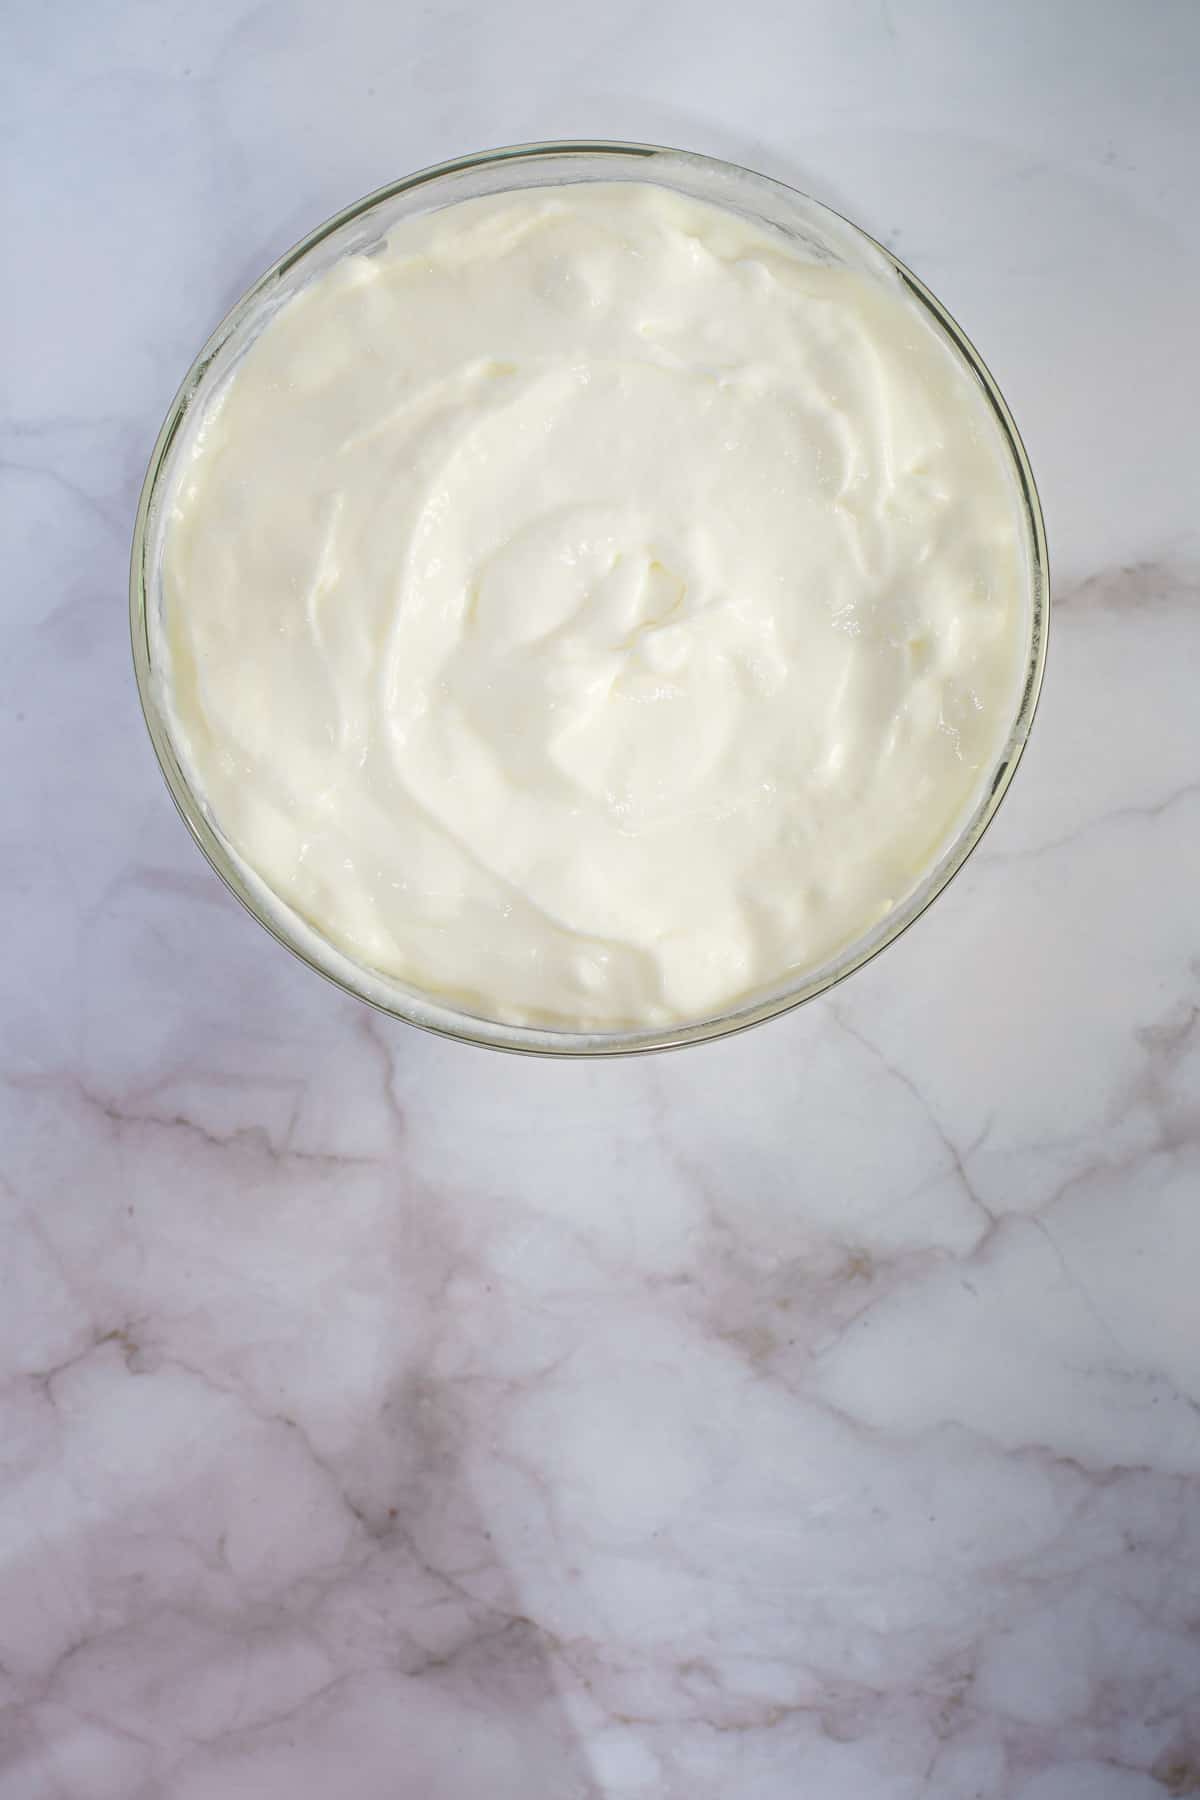 A bowl of mascarpone cheese against marble background.